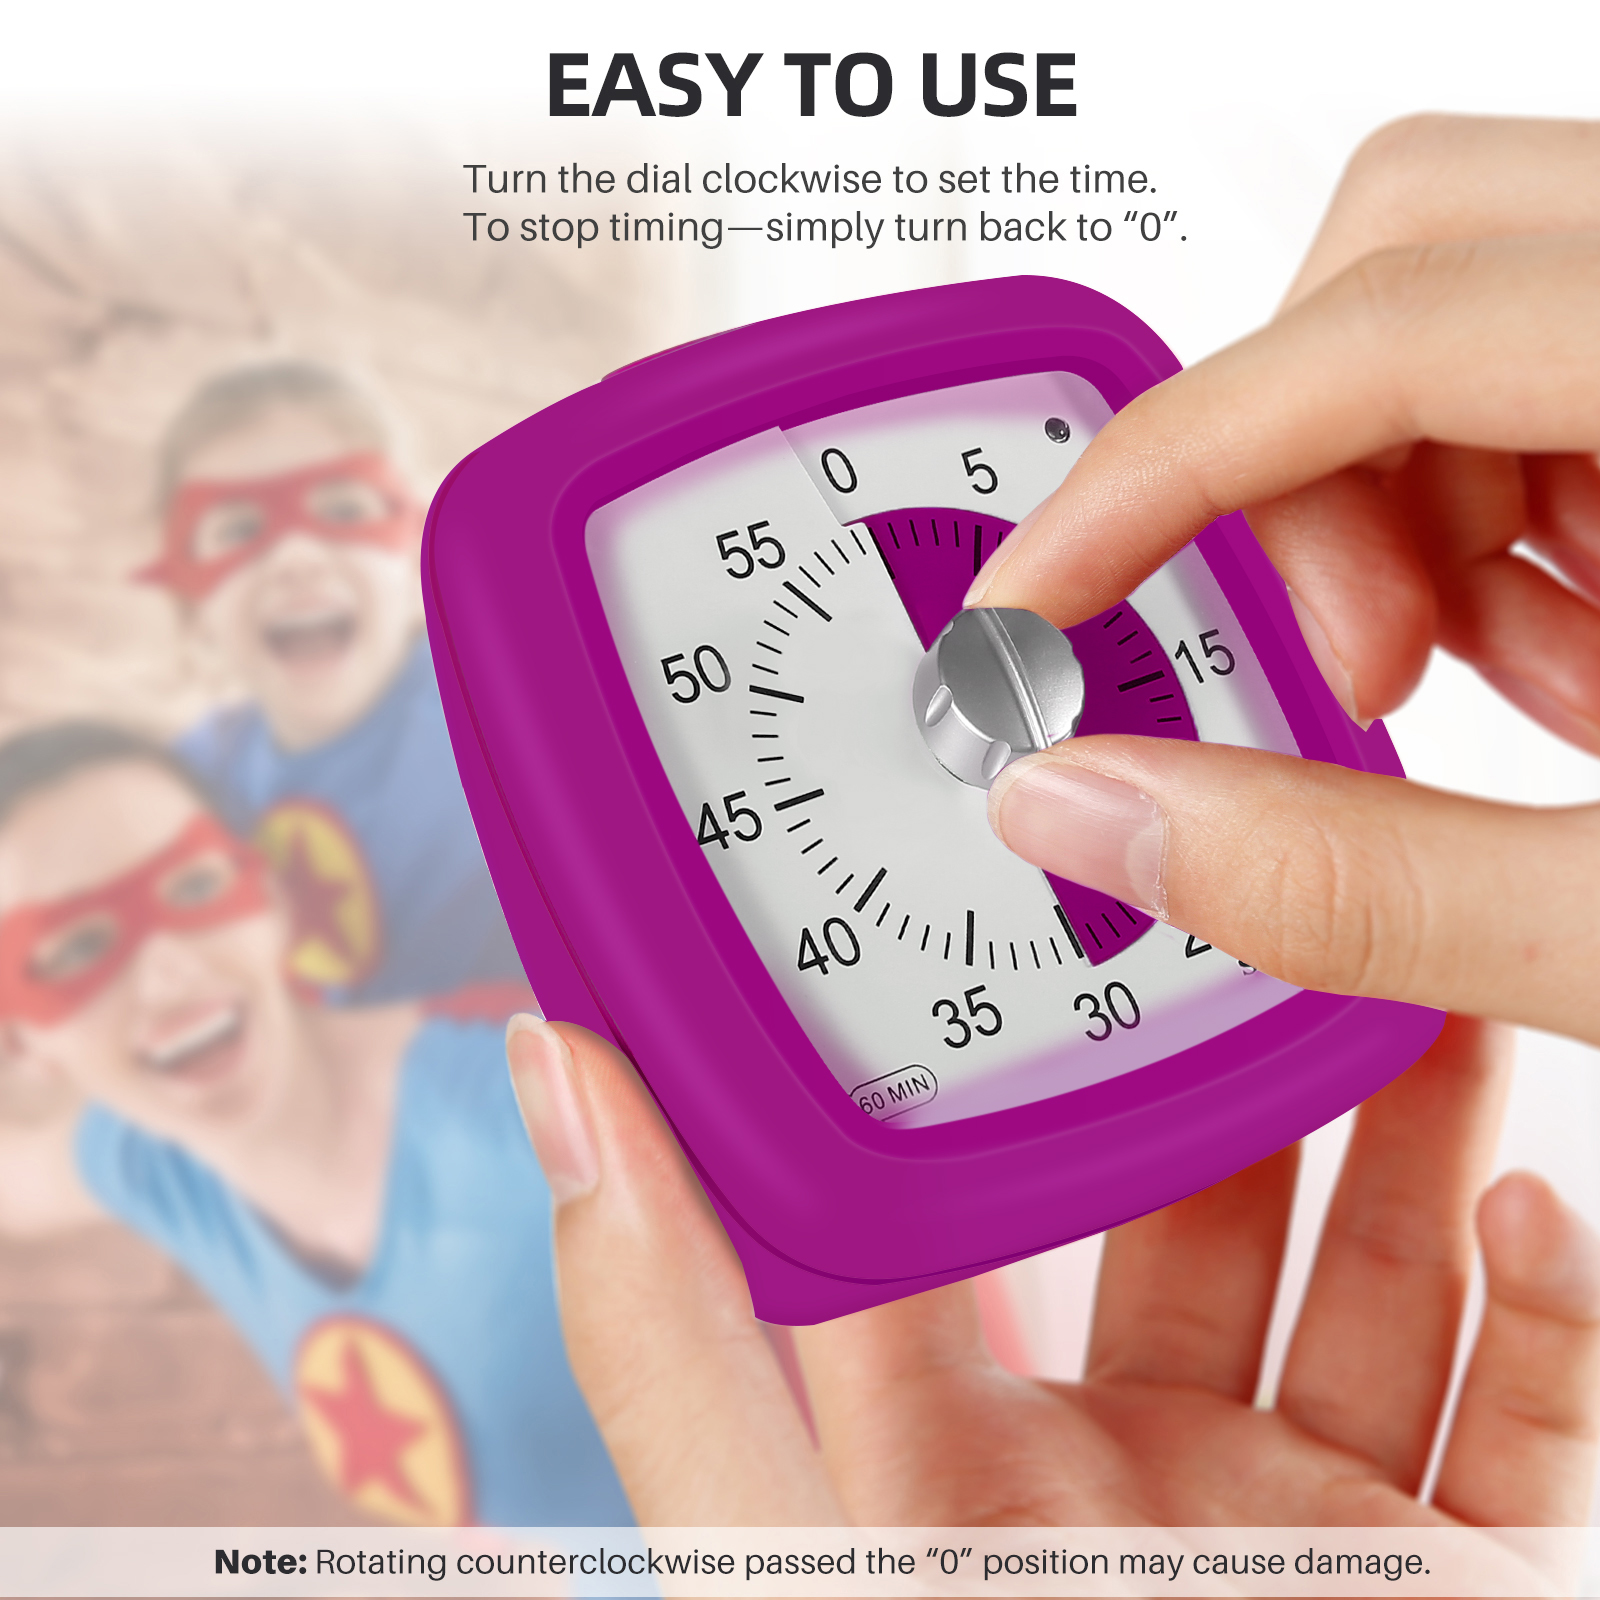 Secura 60-Minute Visual Timer, Silent Study Timer for Kids and Adults, Time  Clocks, Time Management Countdown Timer for Teaching (Violet & Violet) -  The Secura